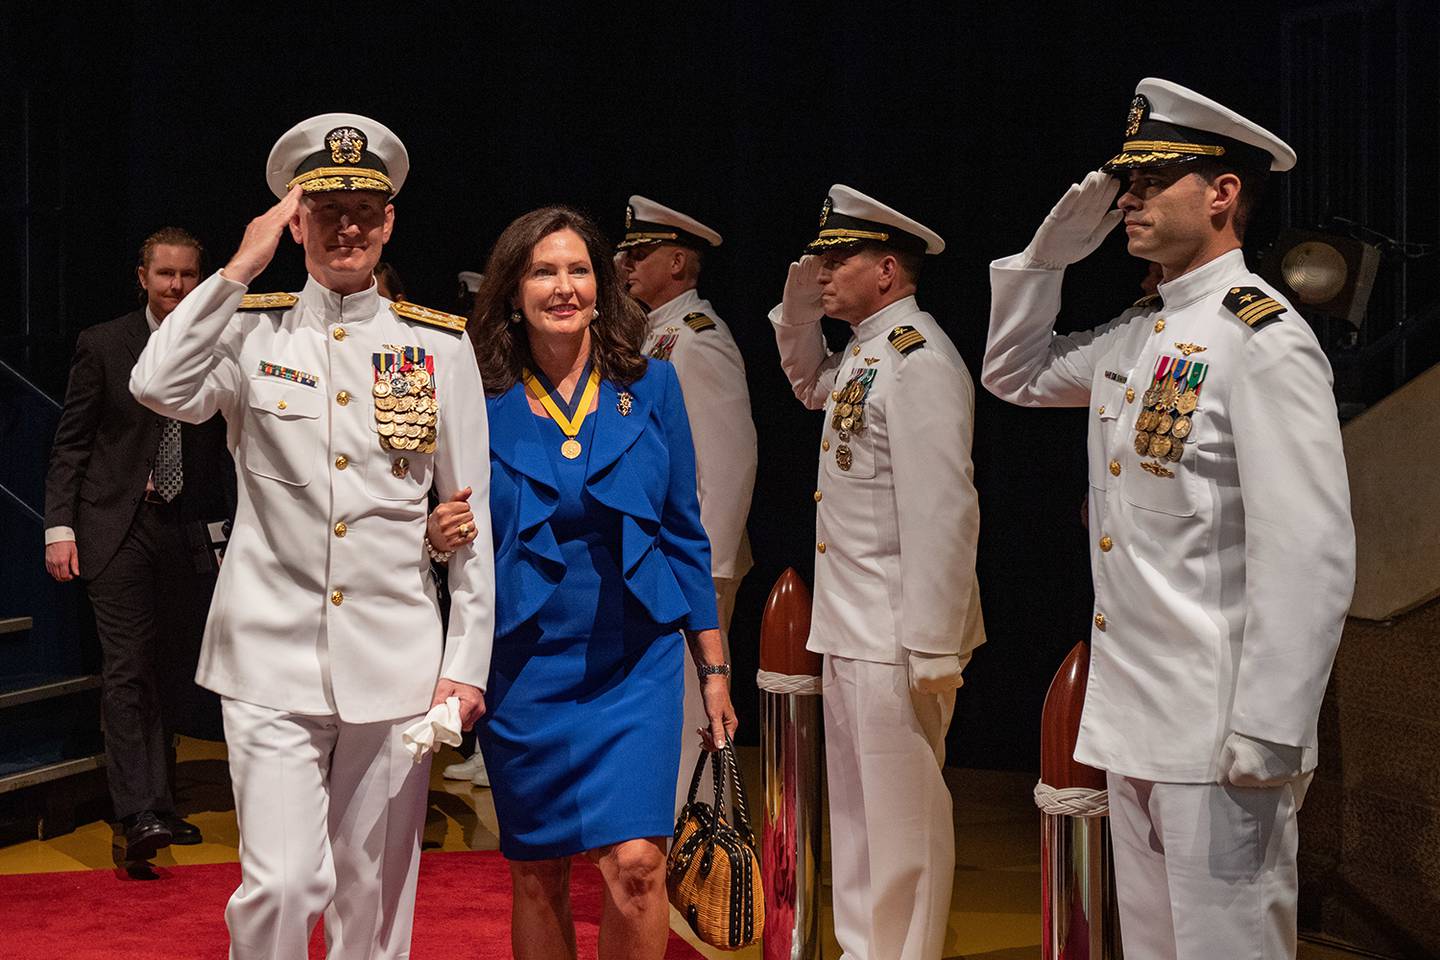 Sideboys render honors as Vice Adm. Walter E. “Ted” Carter Jr. and his family are piped ashore for the last time after 38 years of active duty naval service on July 26, 2019, at Annapolis, Md.